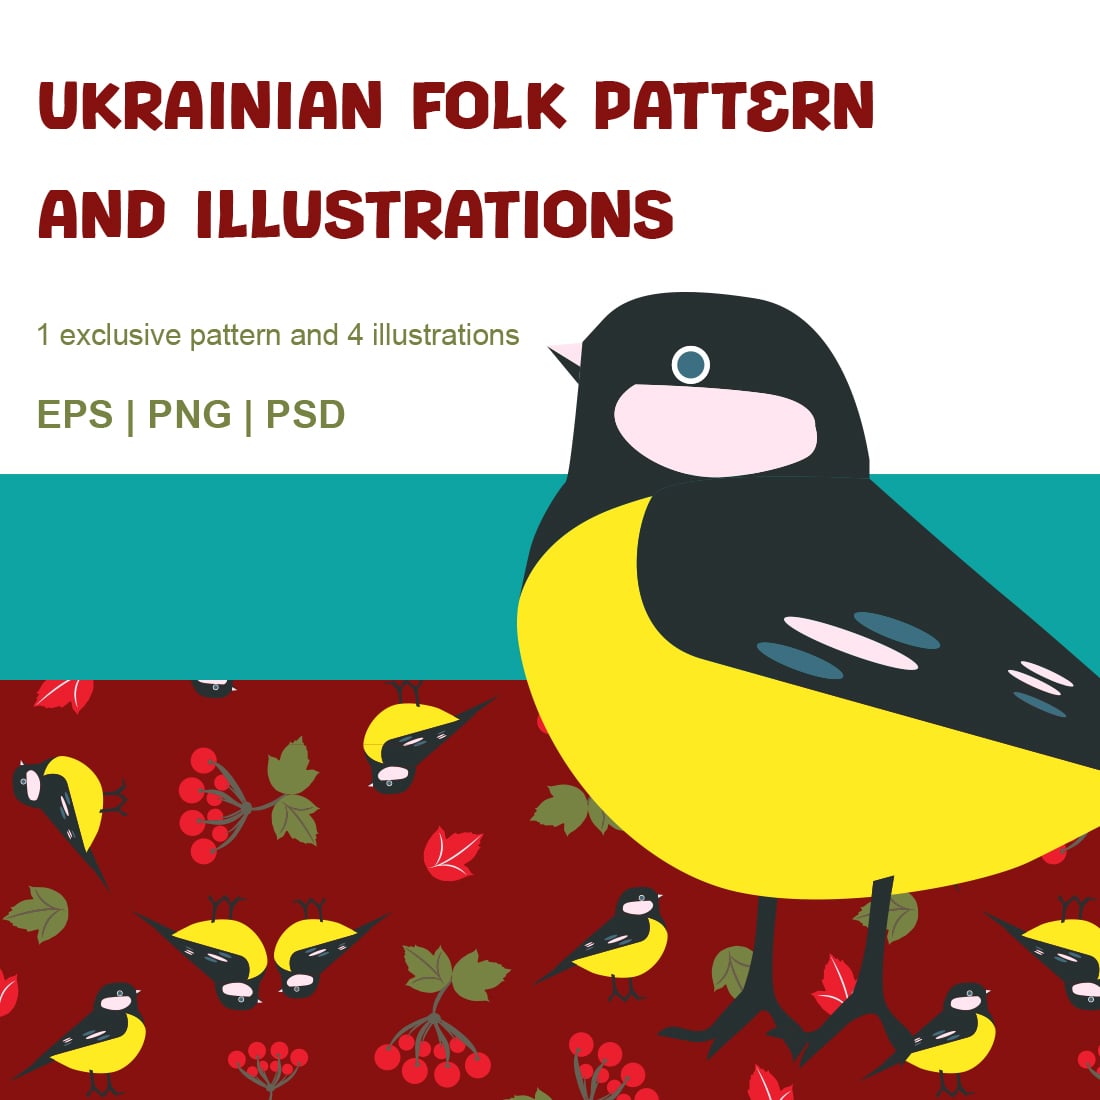 Exclusive cute and modern Ukrainian folk pattern and illustrations Colored background pattern Cartoon Illustration cover image.